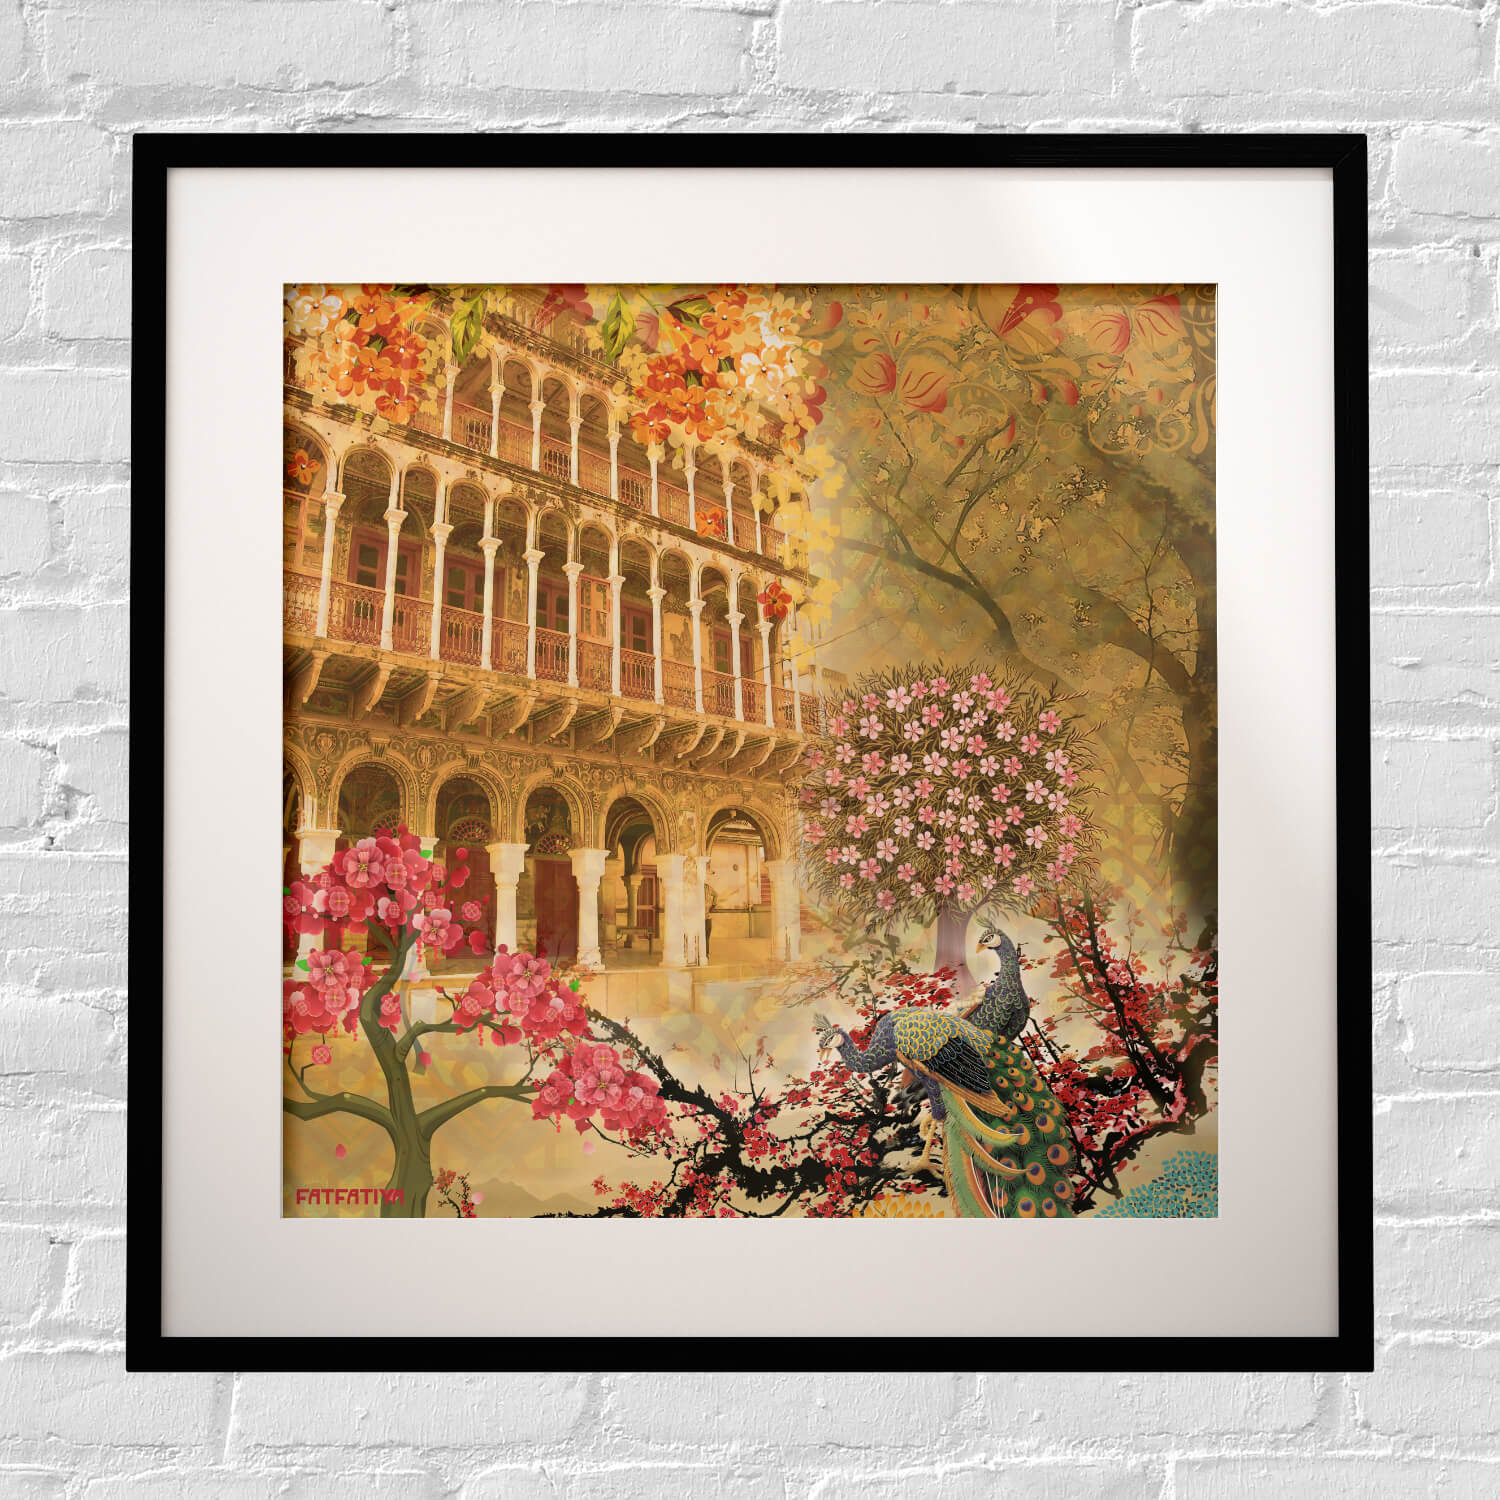 Historical Fort and Floral Framed Indian Wall Art Print